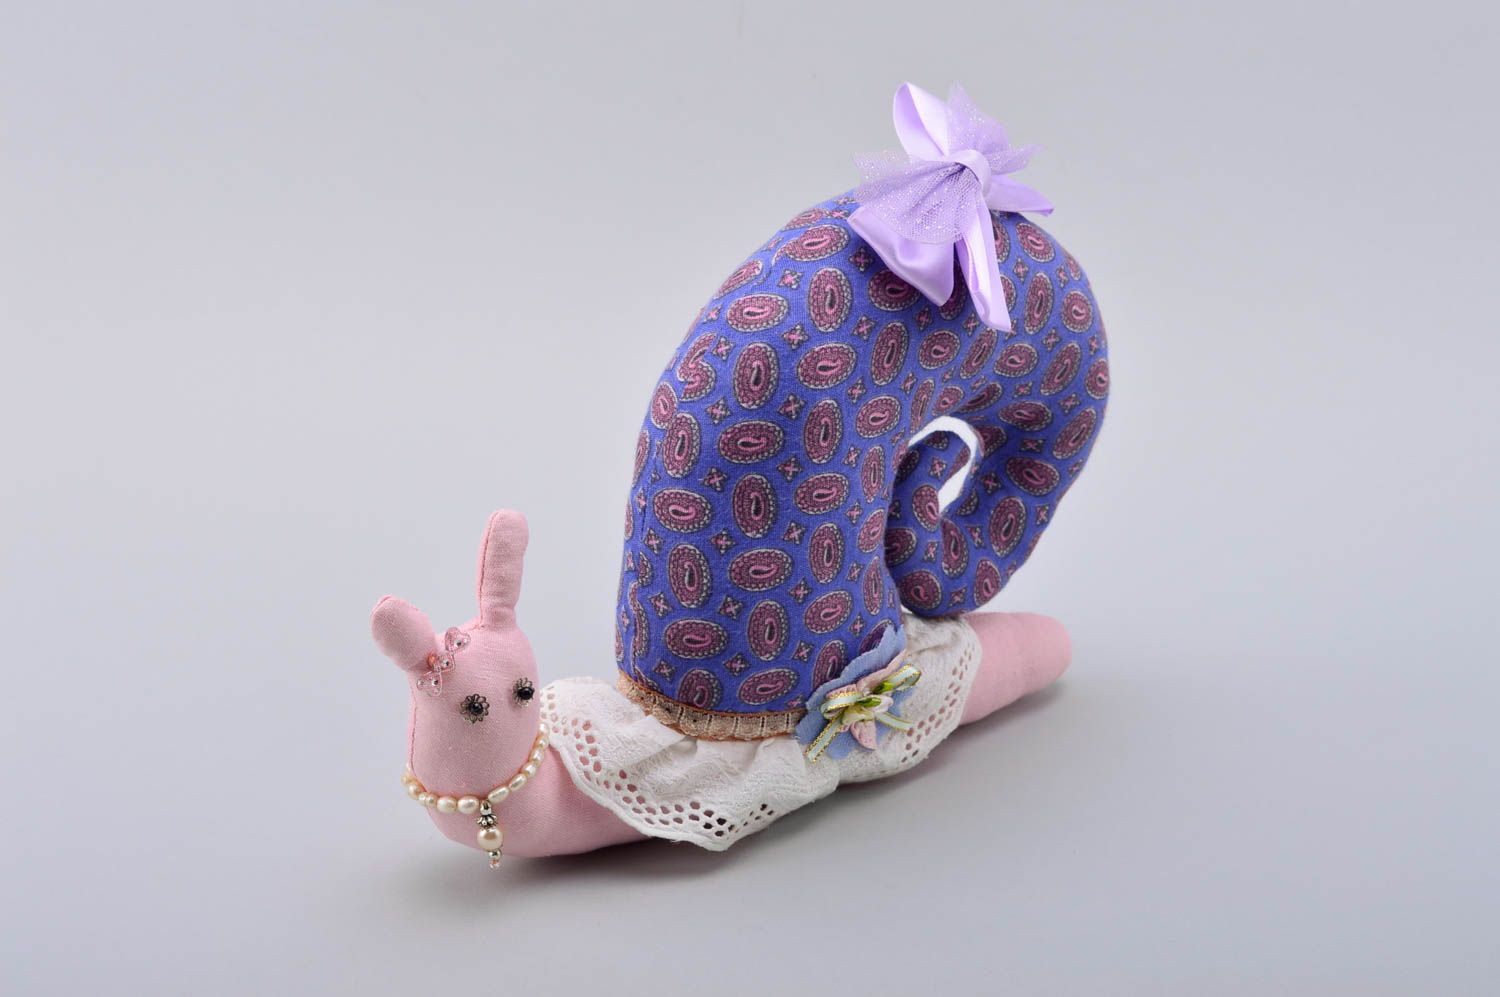 Homemade soft toy snail toy gifts for kids stuffed animals collectible toys photo 4